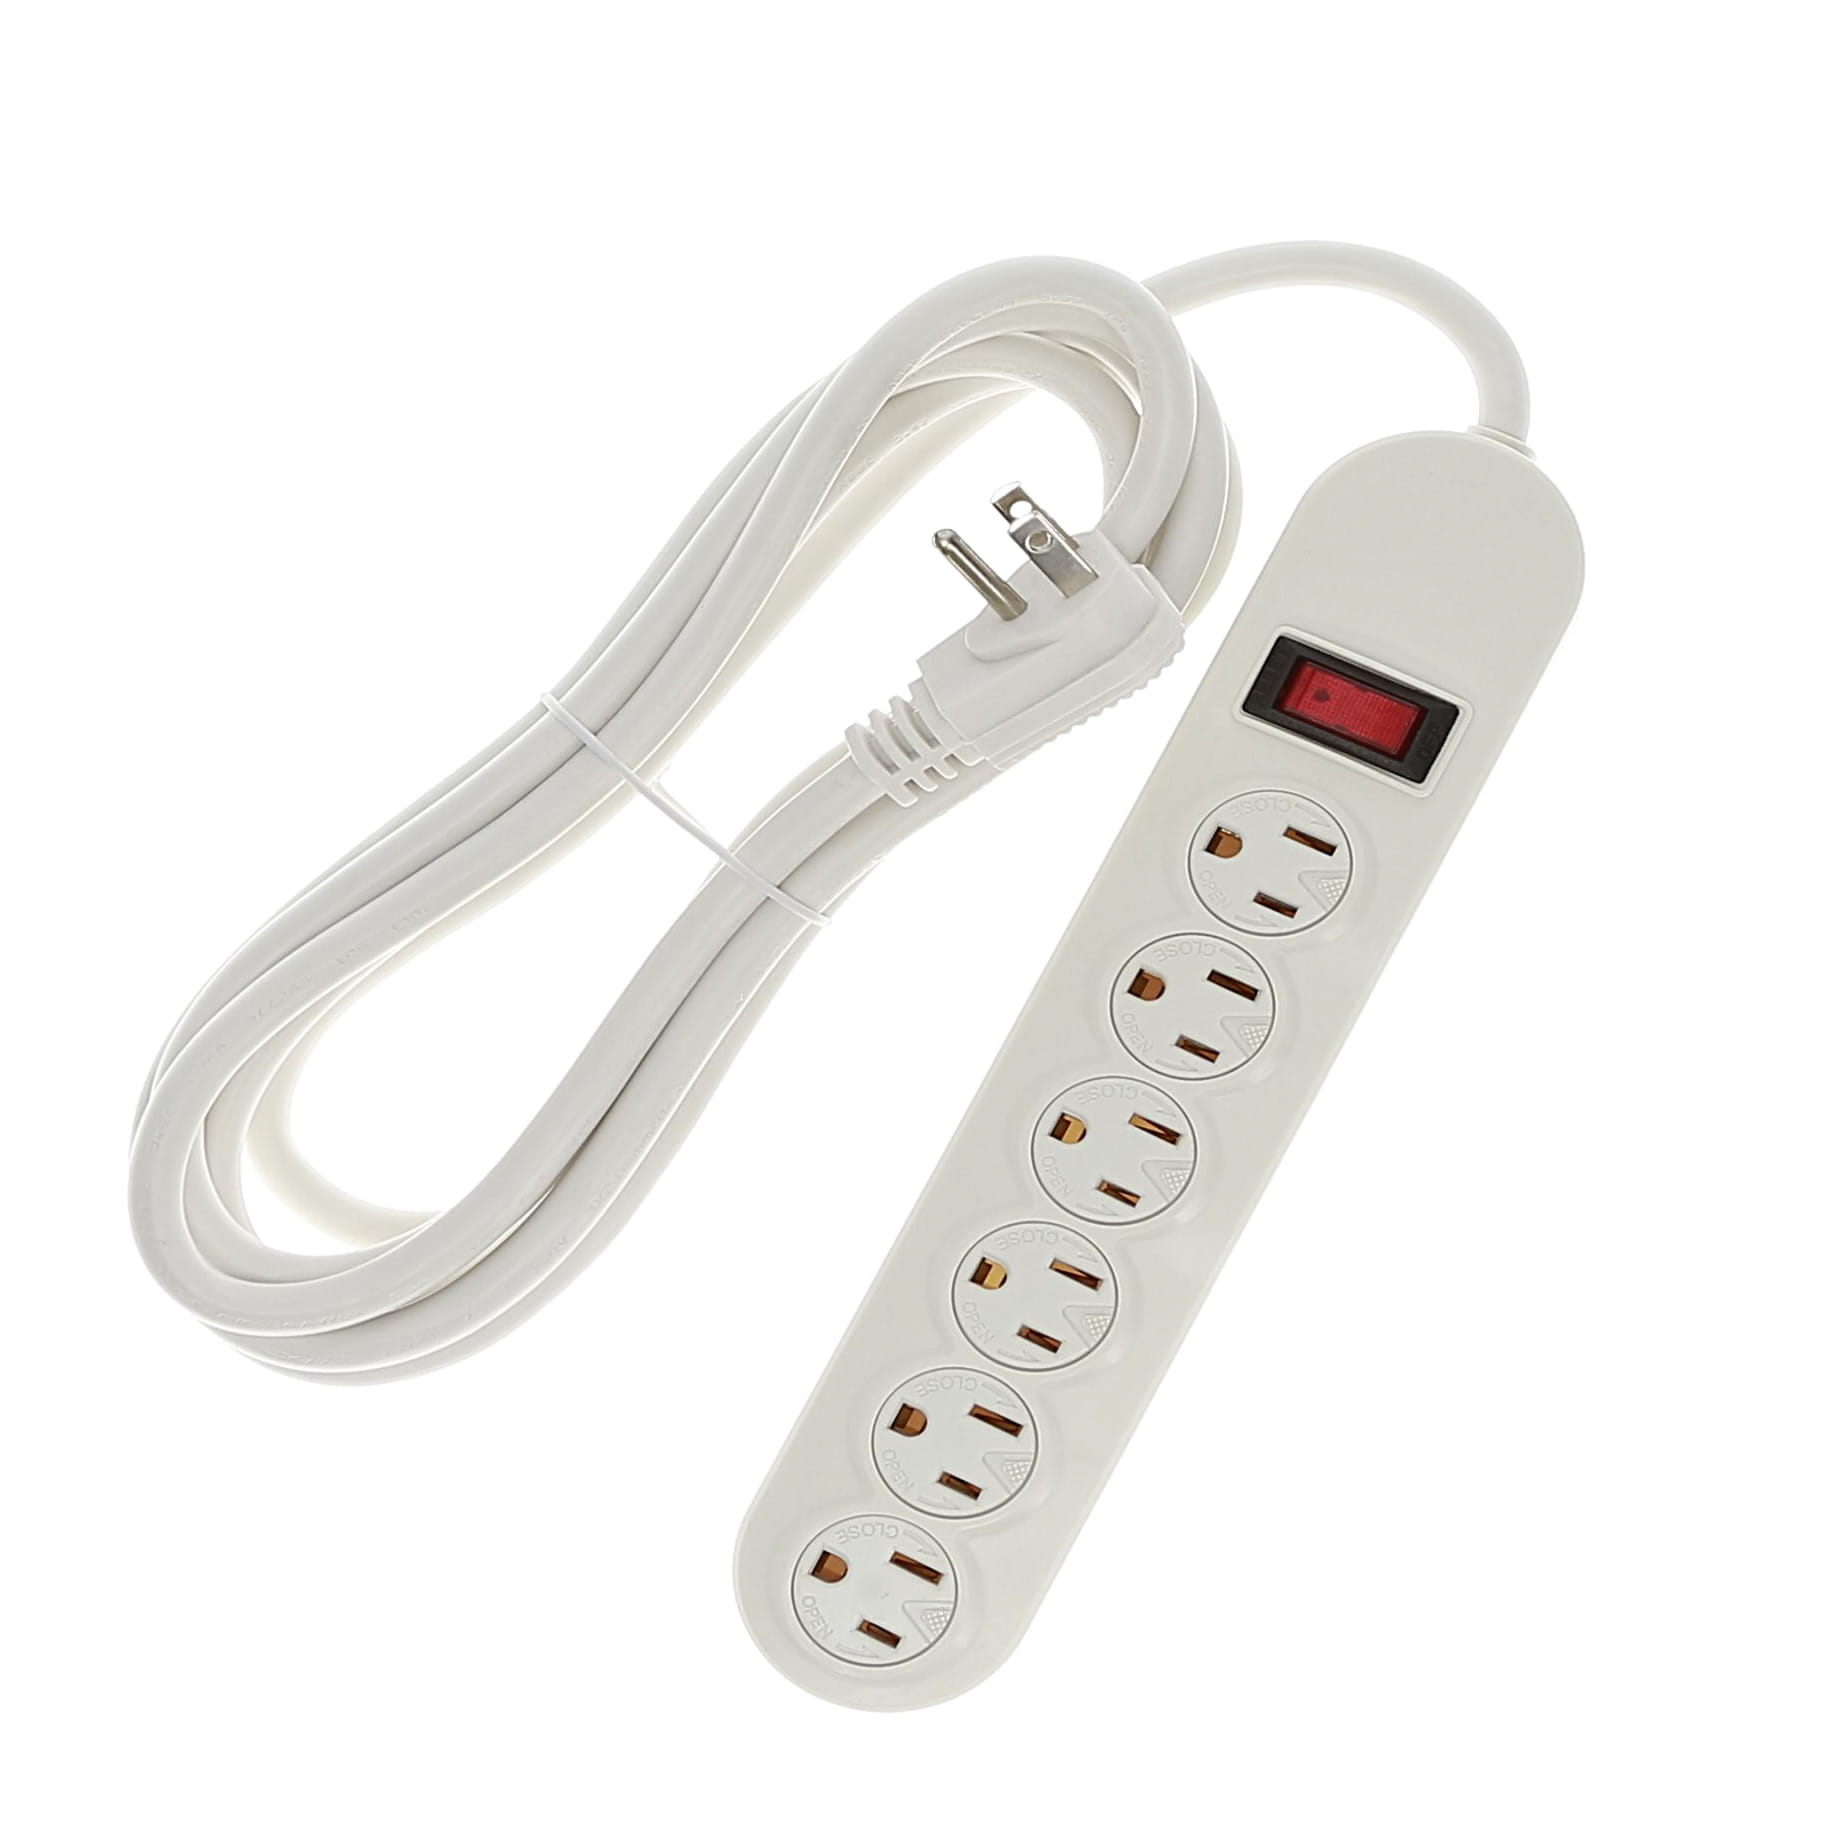 Img for product 10Ft 6-Outlet Perpendicular Power Strip